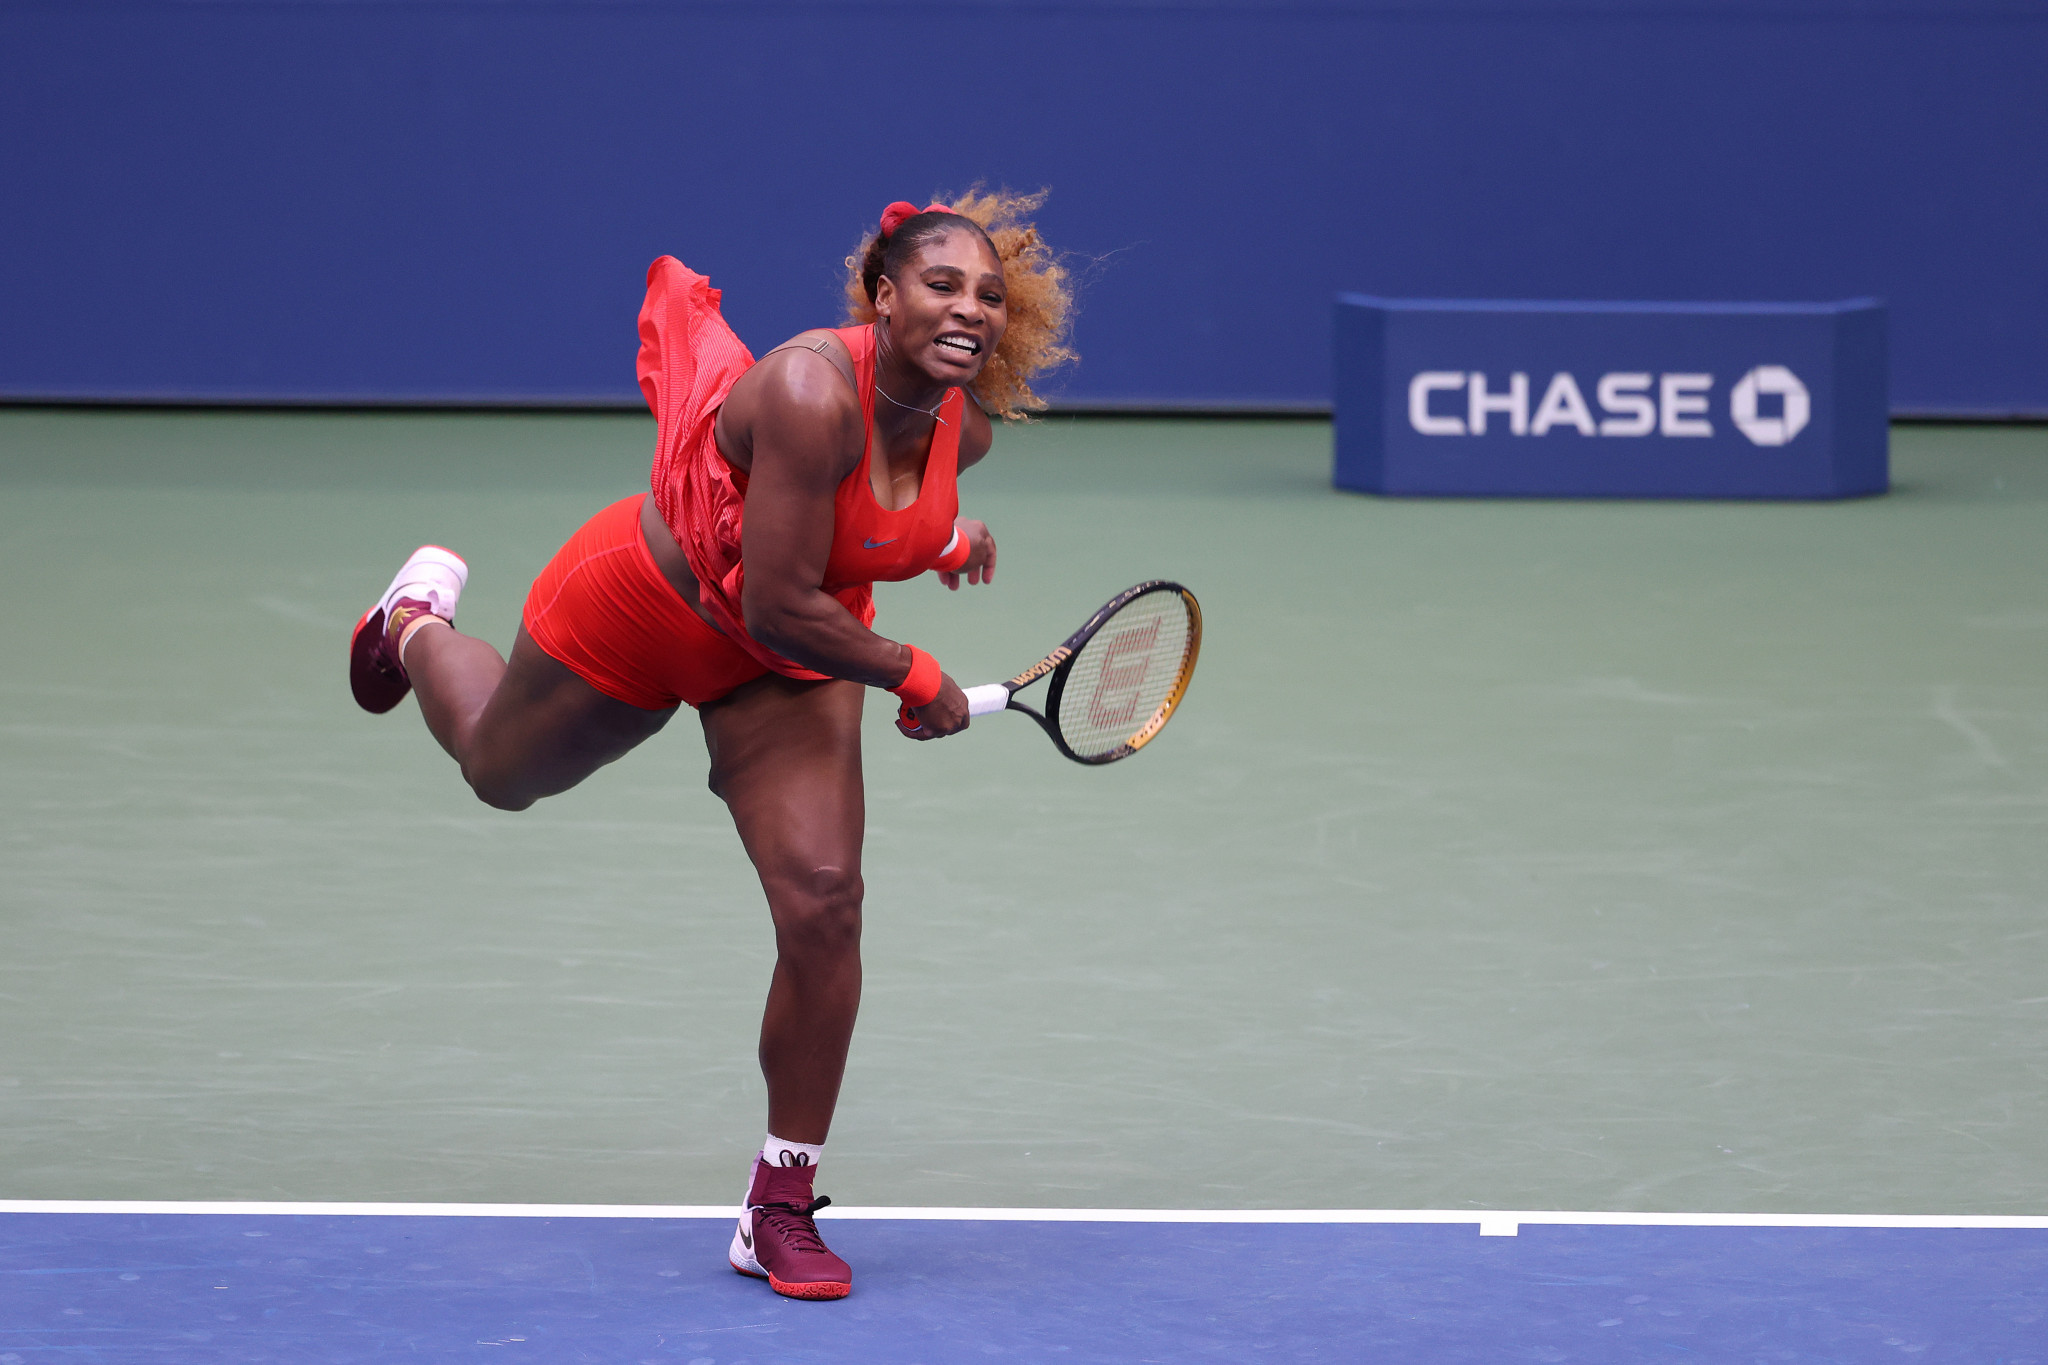 Third seed Serena Williams recorded a straight sets victory over fellow American  Kristie Ahn as she reached round two in New York ©Getty Images